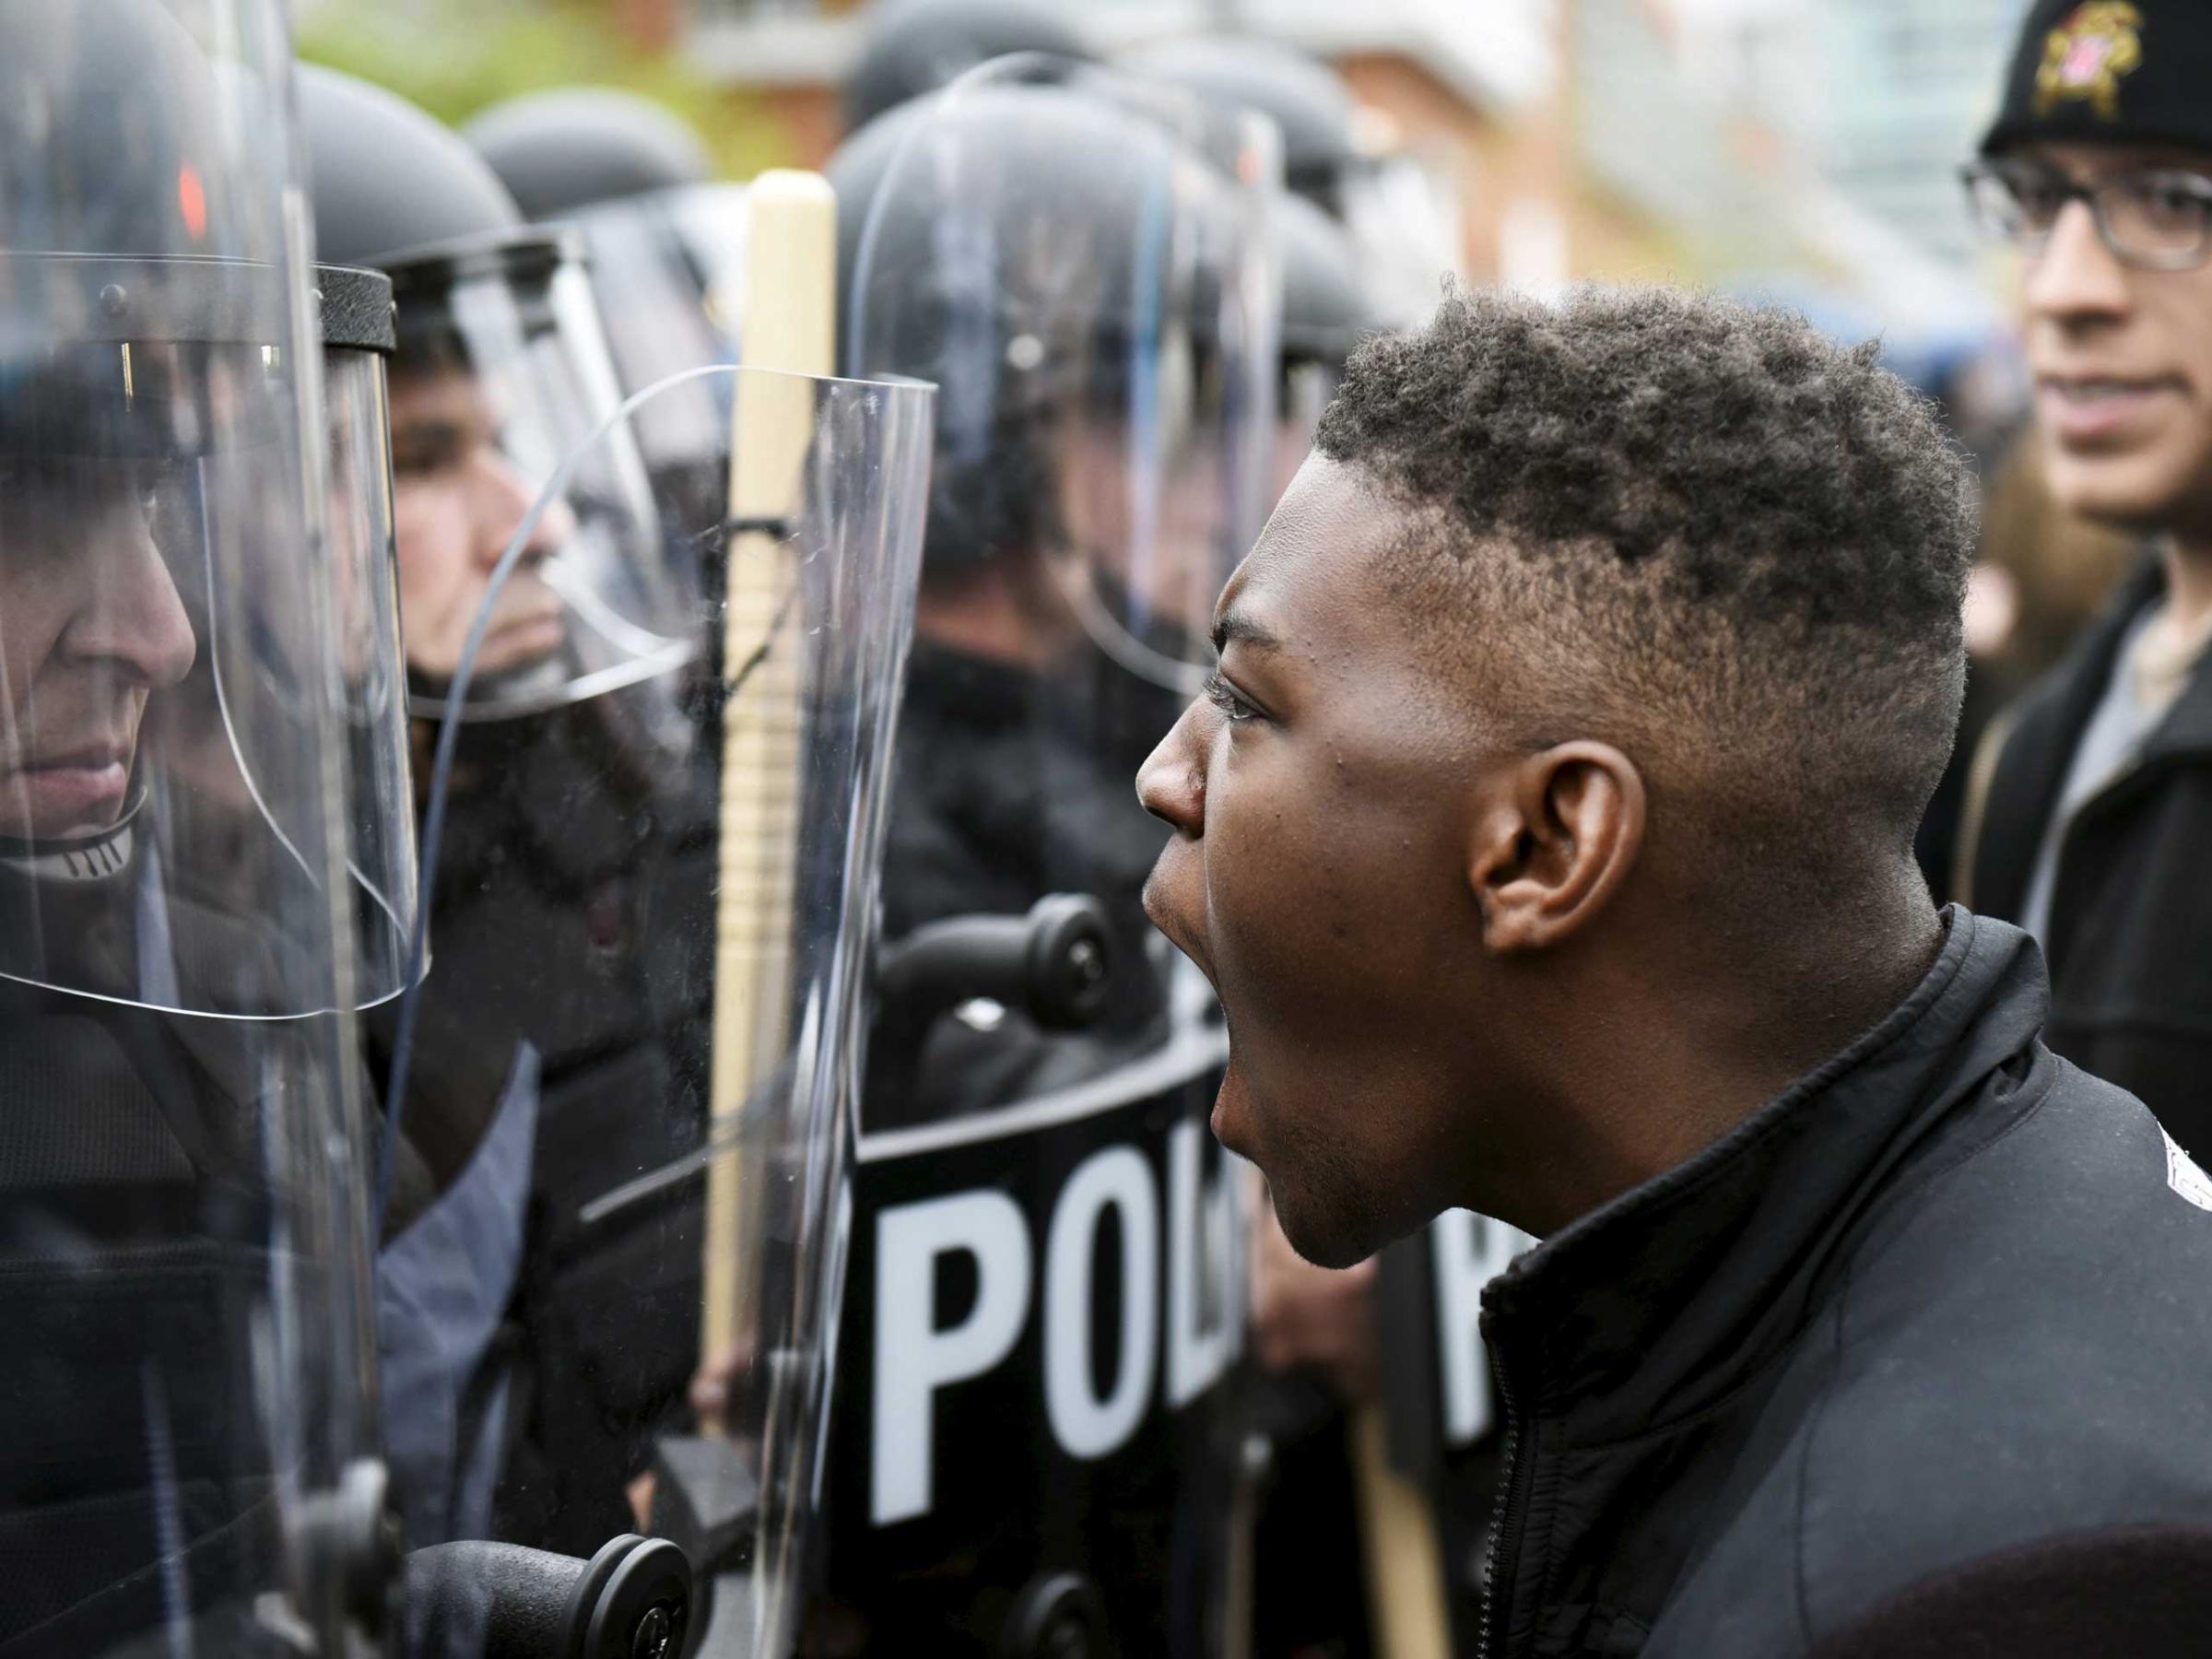 A demonstrator confronts police near Camden Yards during a protest in Baltimore on April 25, 2015.